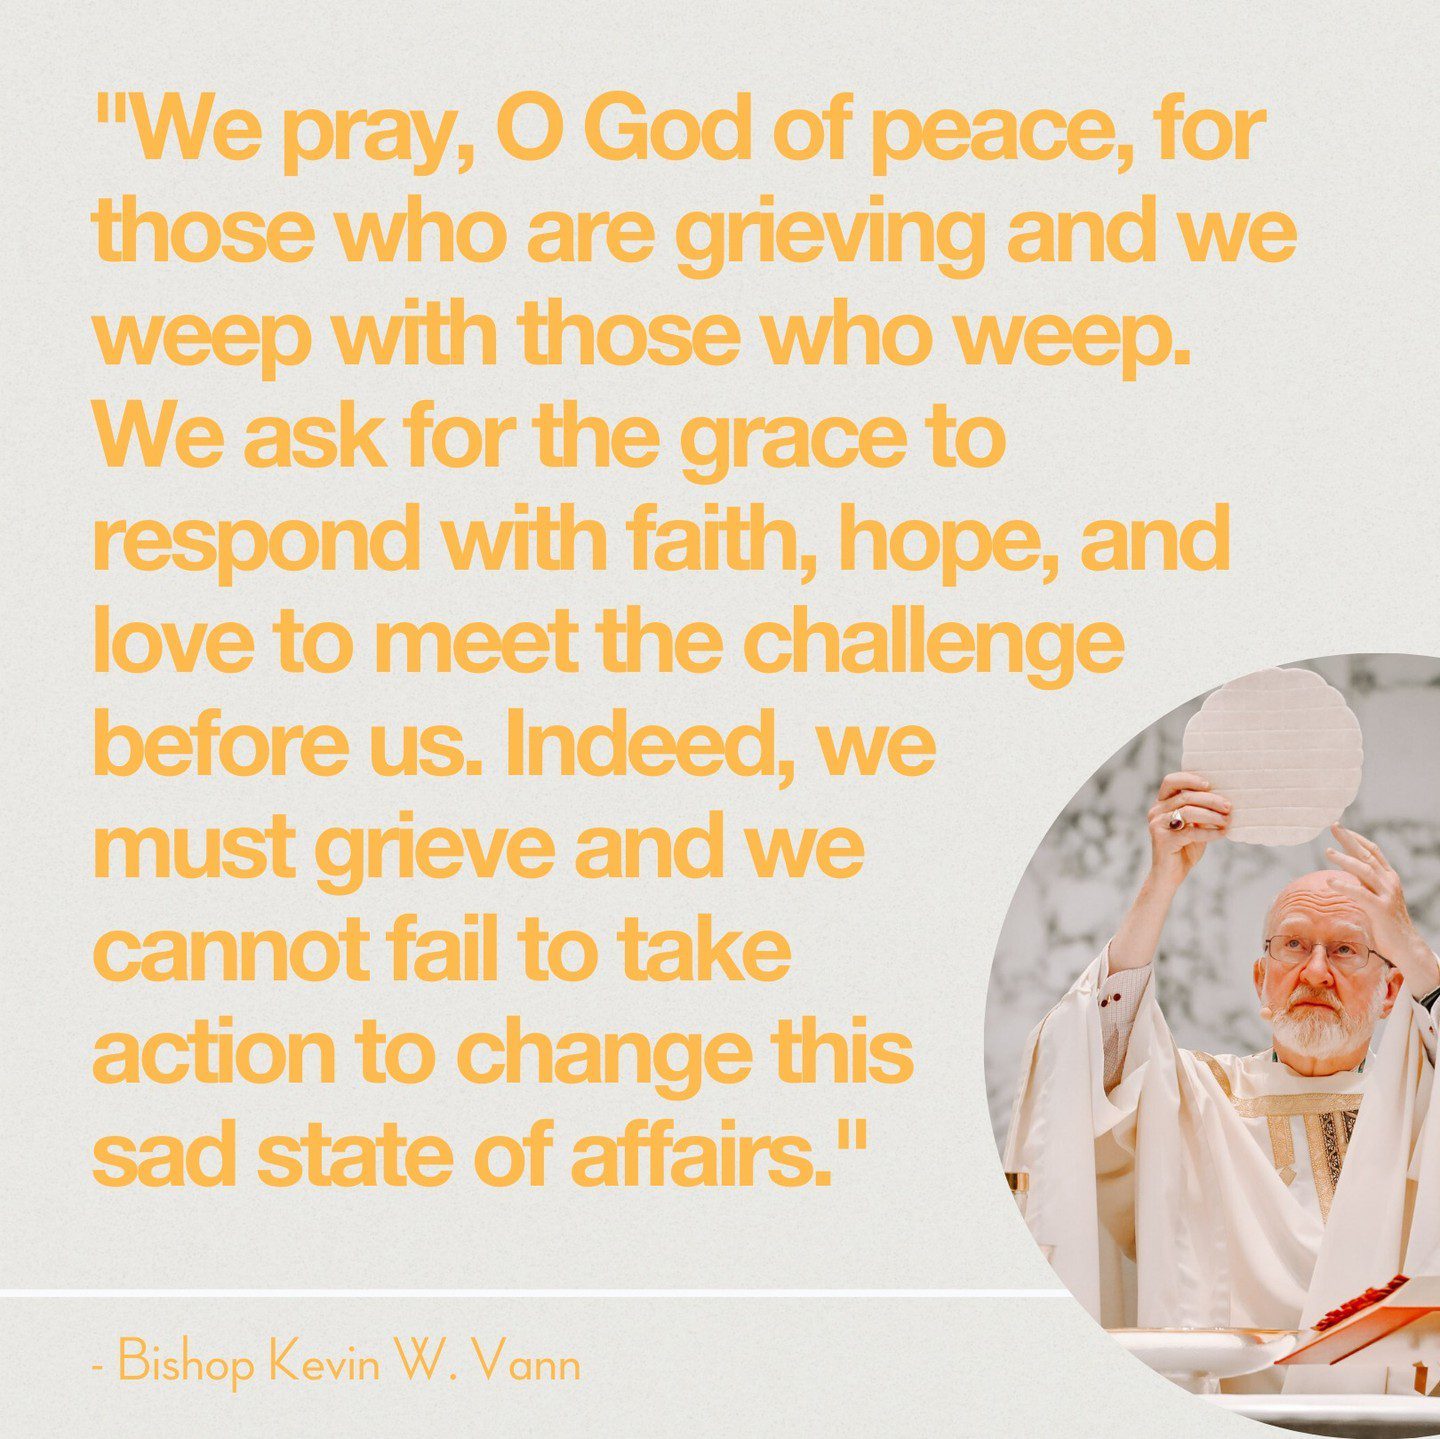 Read Bishop Vann's entire reflection on confronting the recent tragedies around the country with justice, prayer, and the wisdom of the saints using the link in our bio. 

Together in faith we join in prayer and action. 🙏